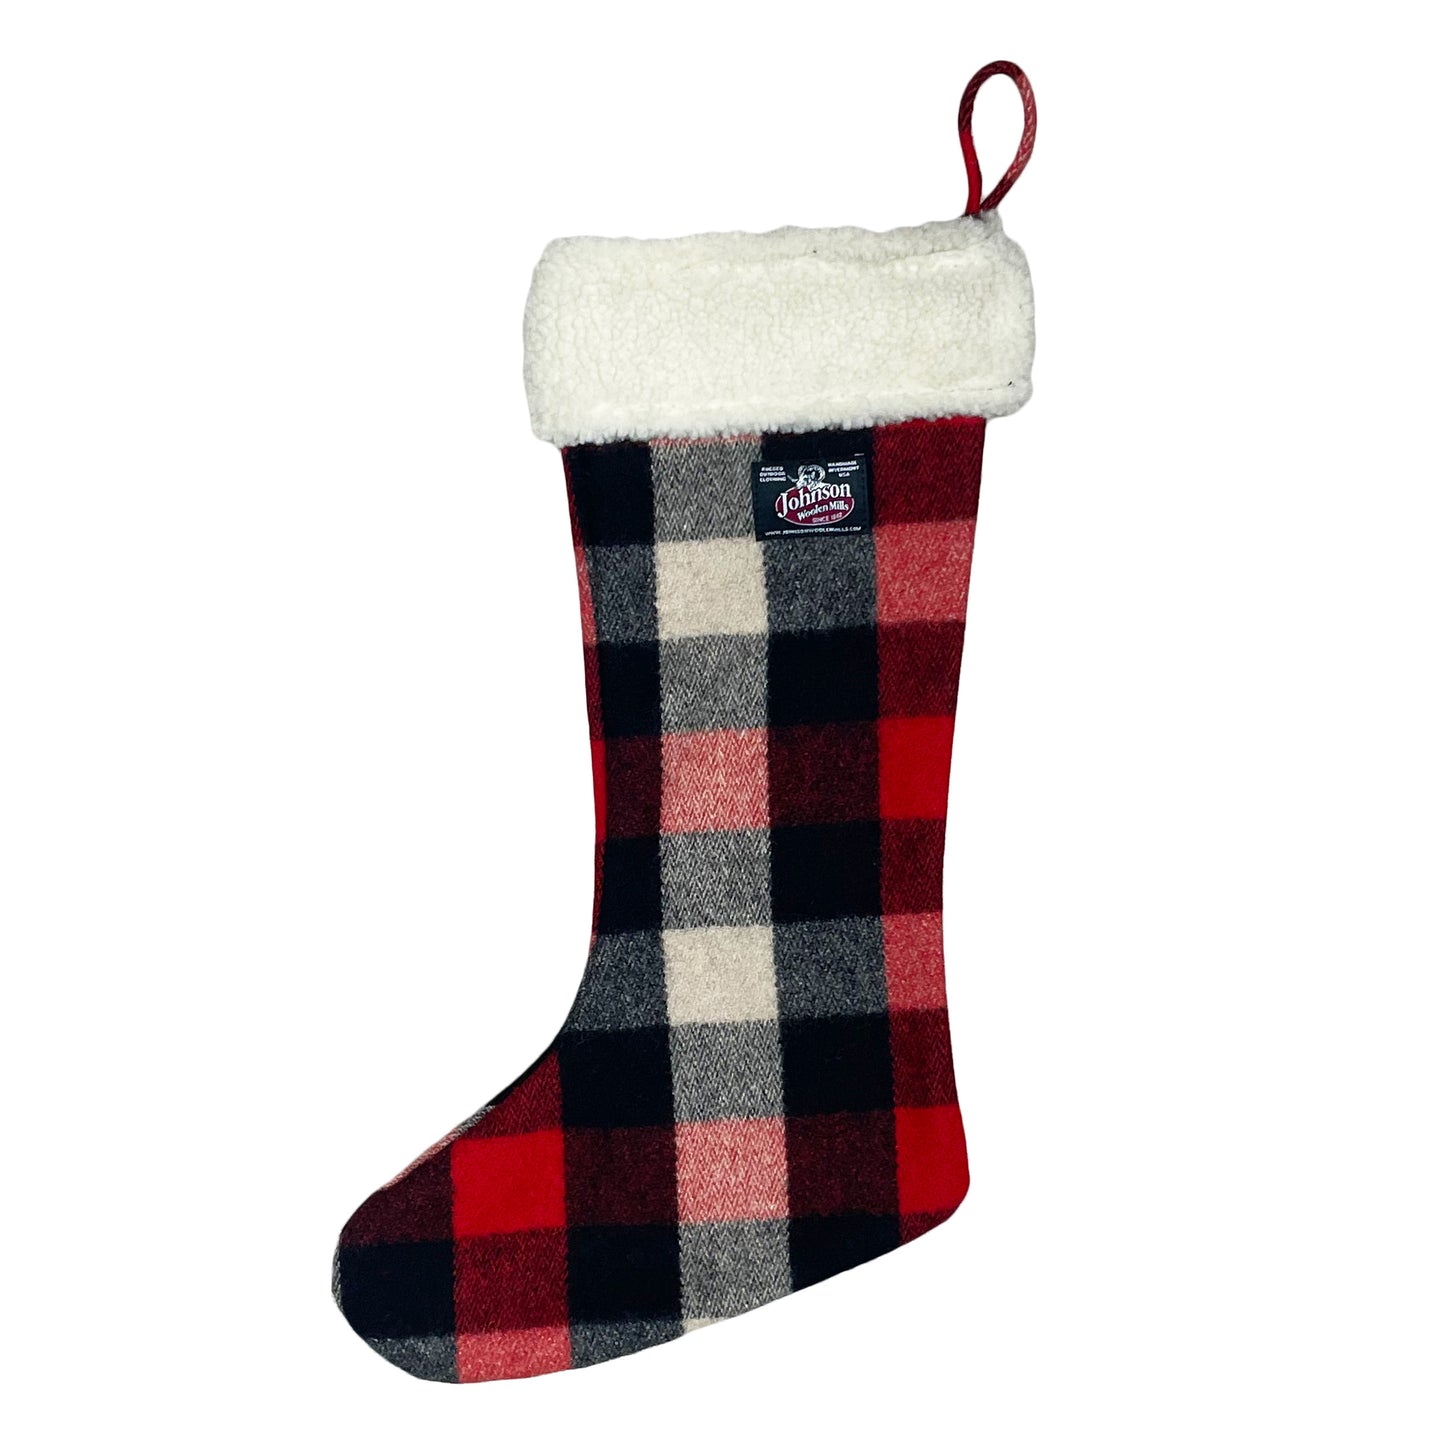 Johnson Woolen Mills red, black, and ivory buffalo check wool Christmas stocking